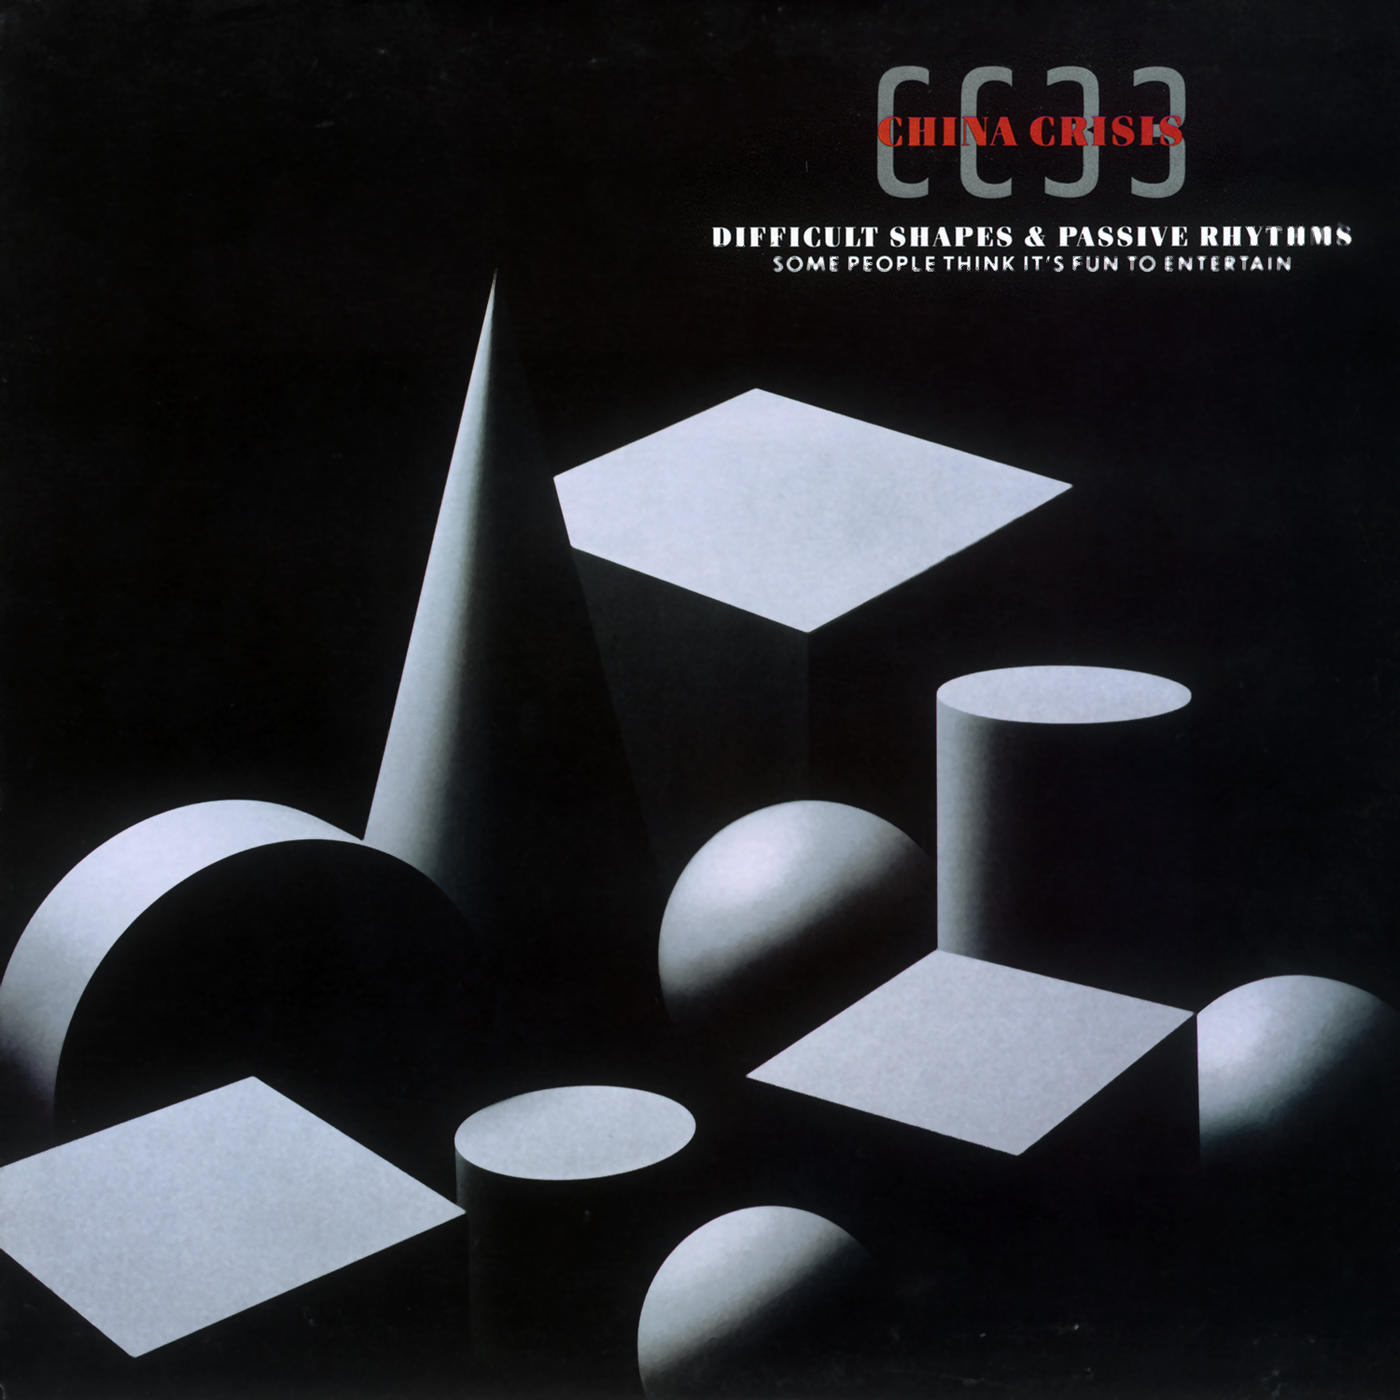 China Crisis - Difficult Shapes And Rhythms Passive - (CD)